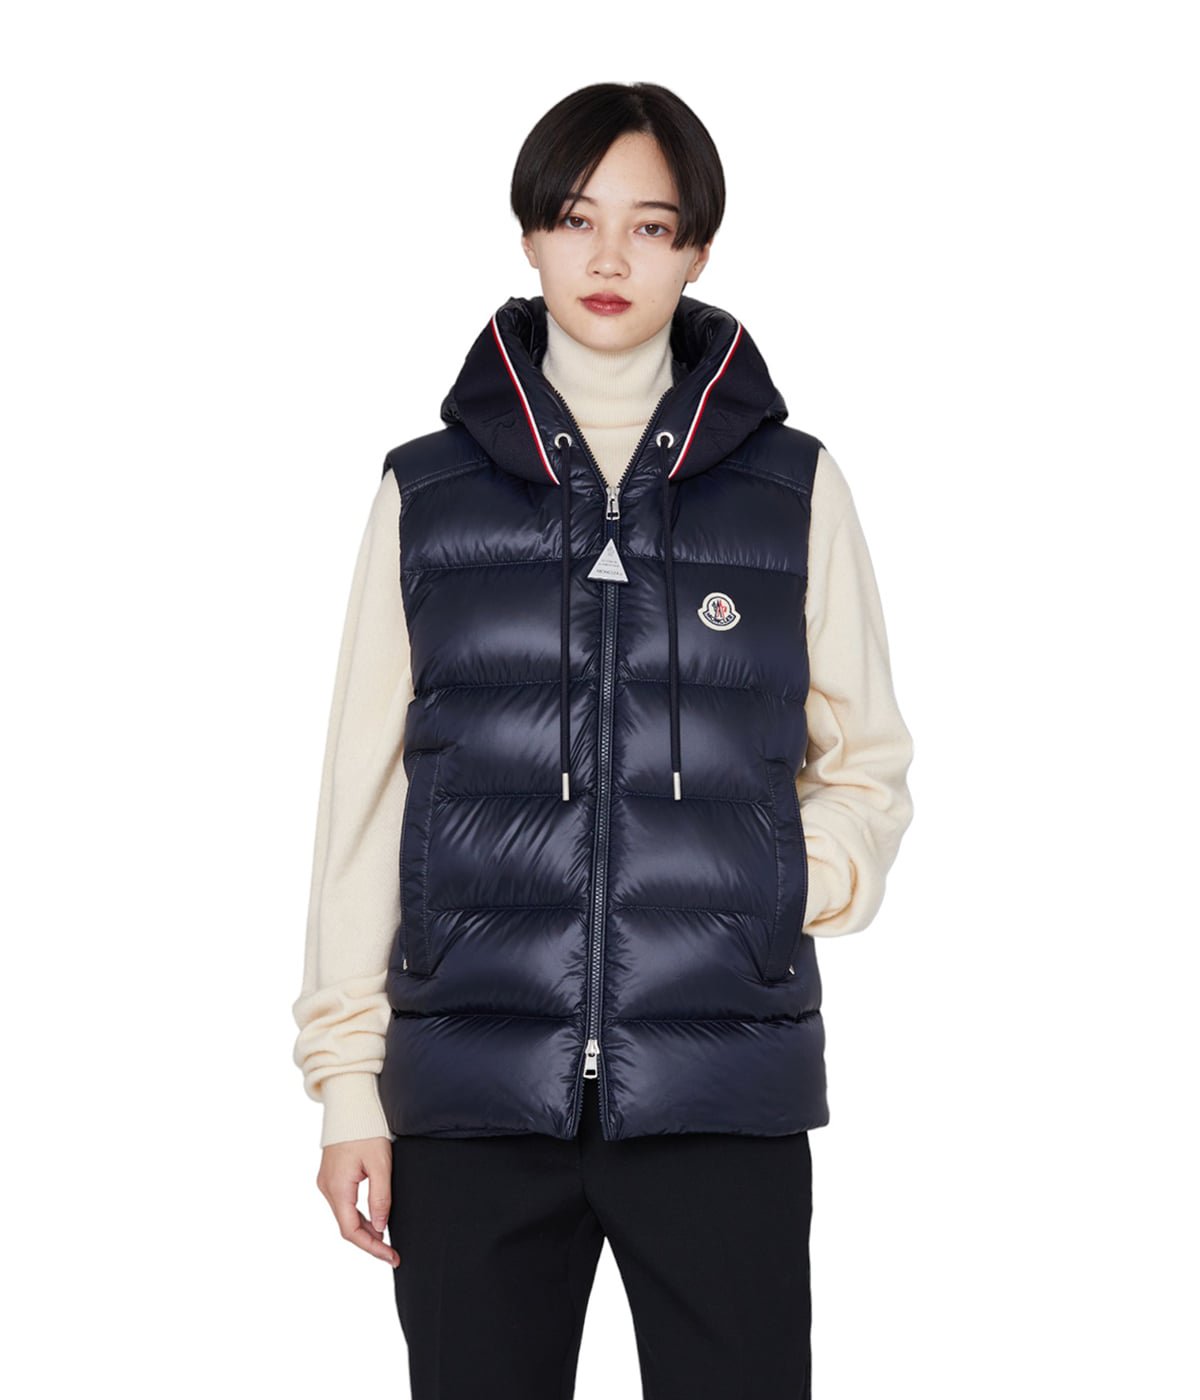 ONLY ARK】Exclusive LUIRO GILET - ルイロ ジレ - | MONCLER 